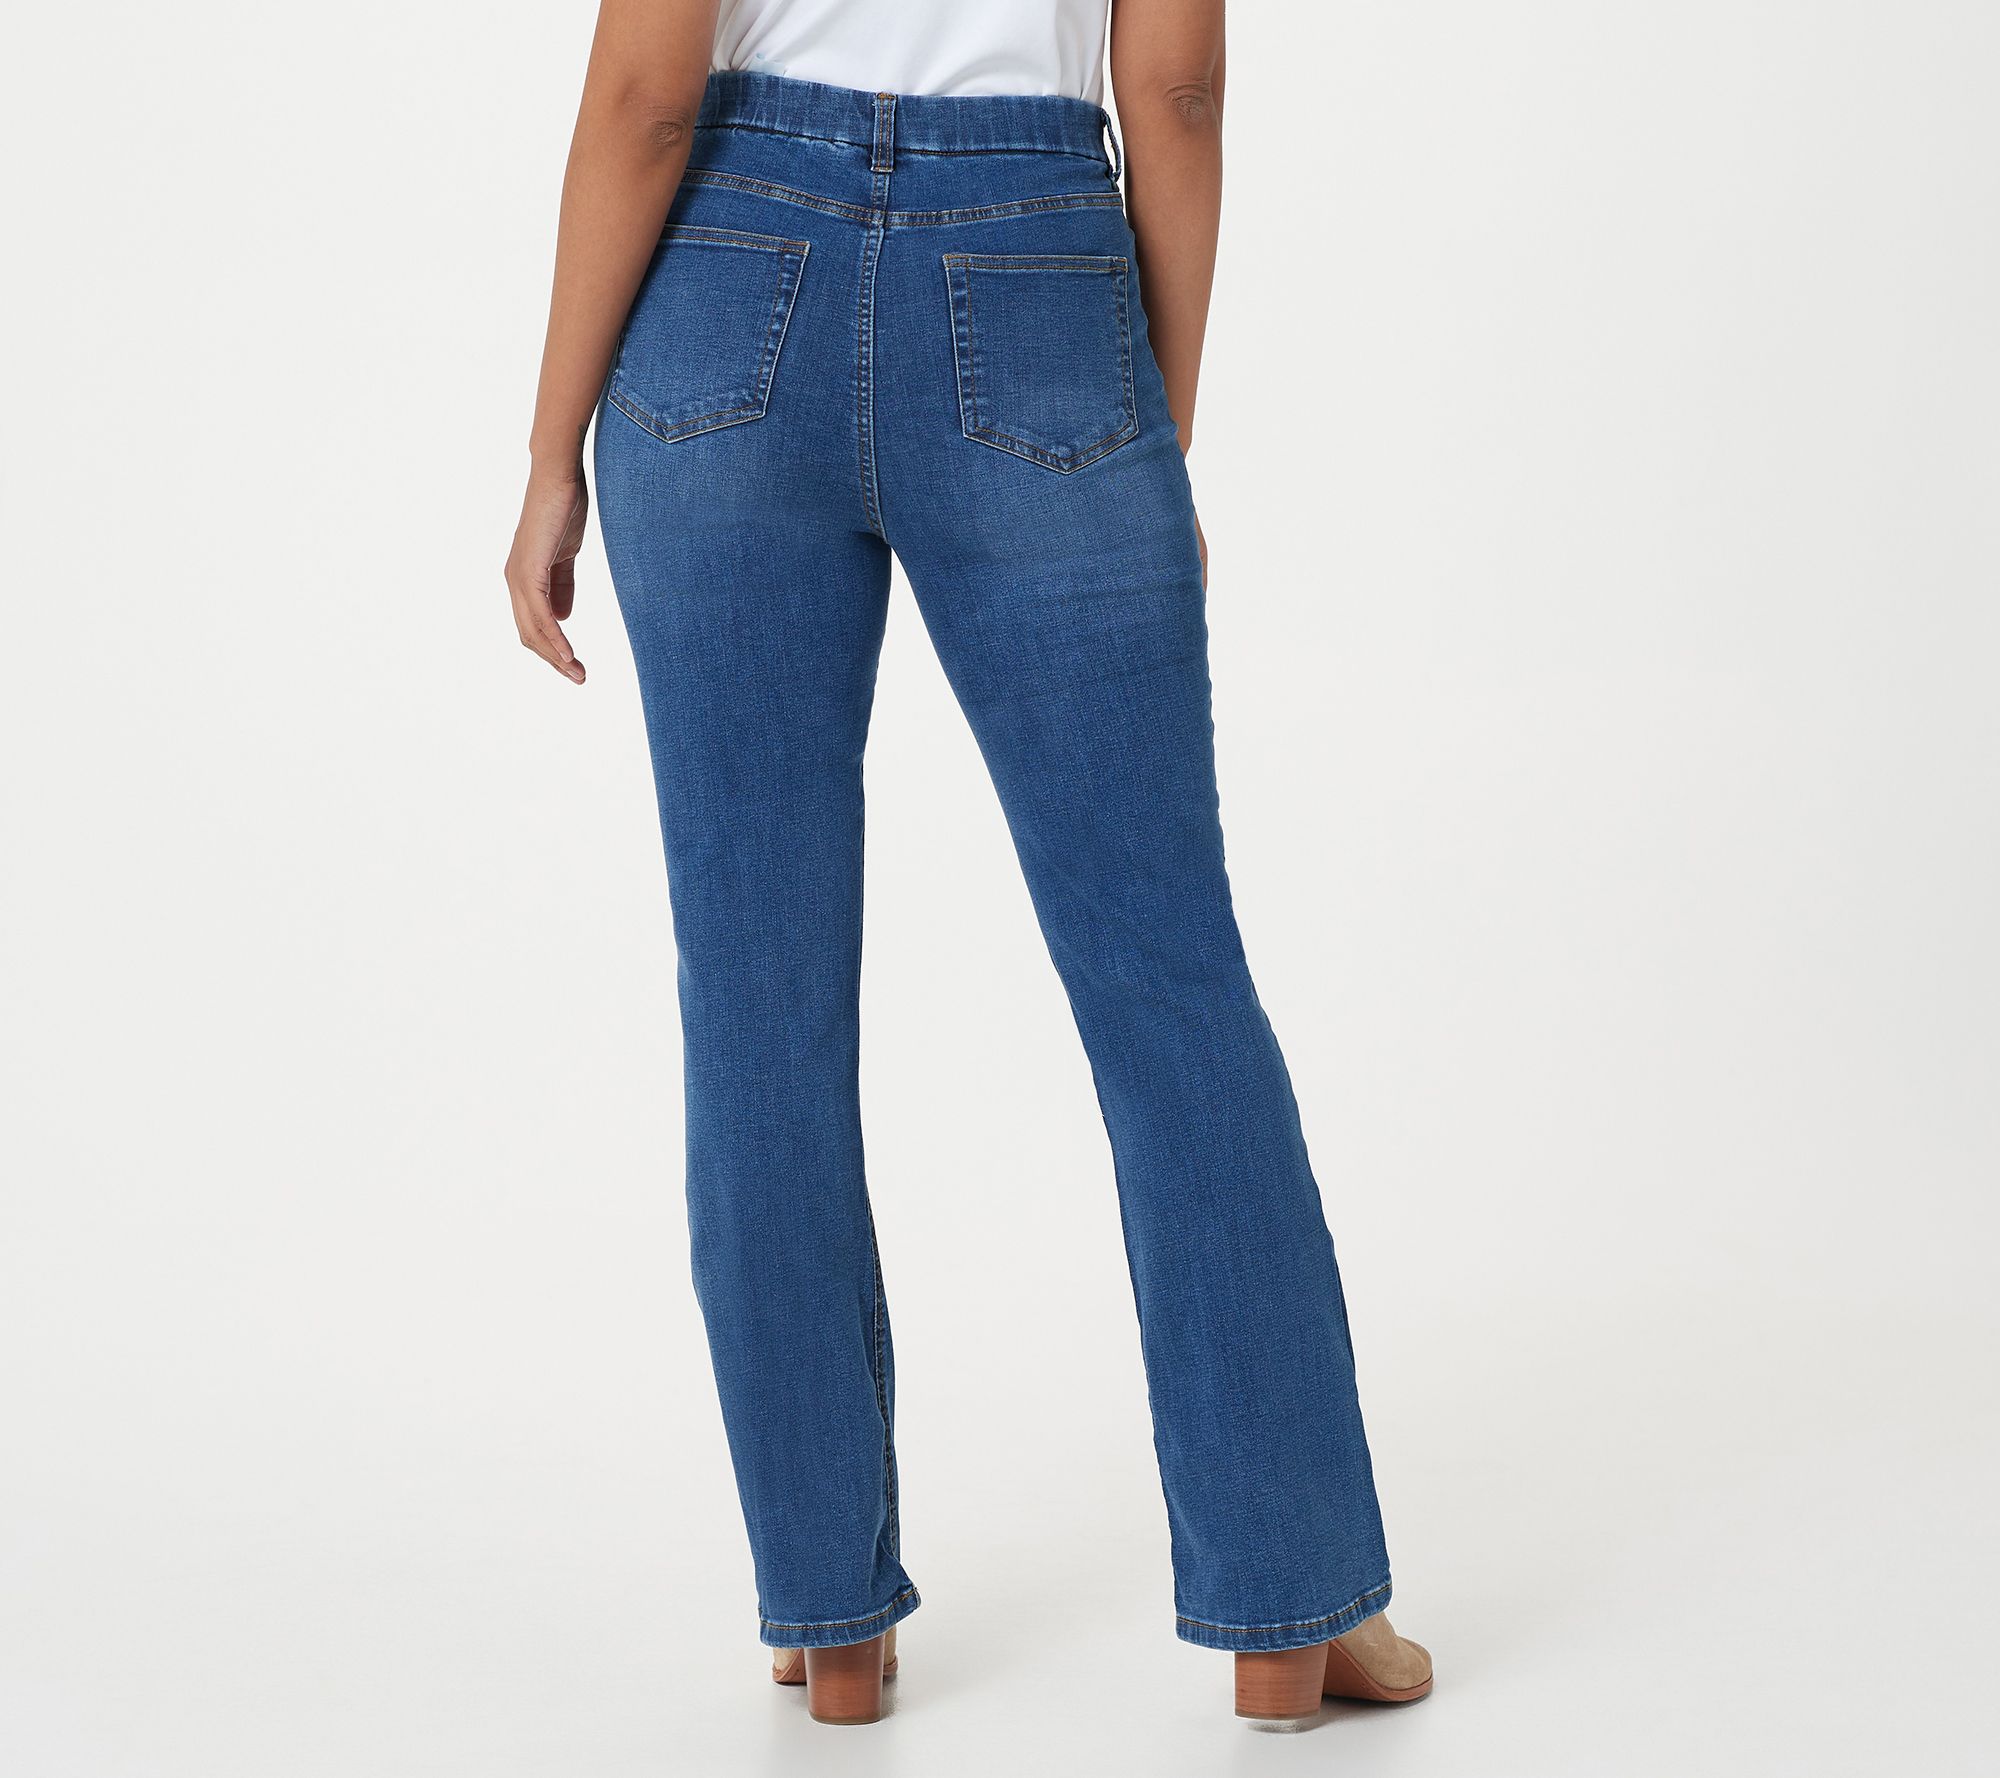 Denim & Co. Easy Stretch Pull-On Bootcut Jeans - QVC.com